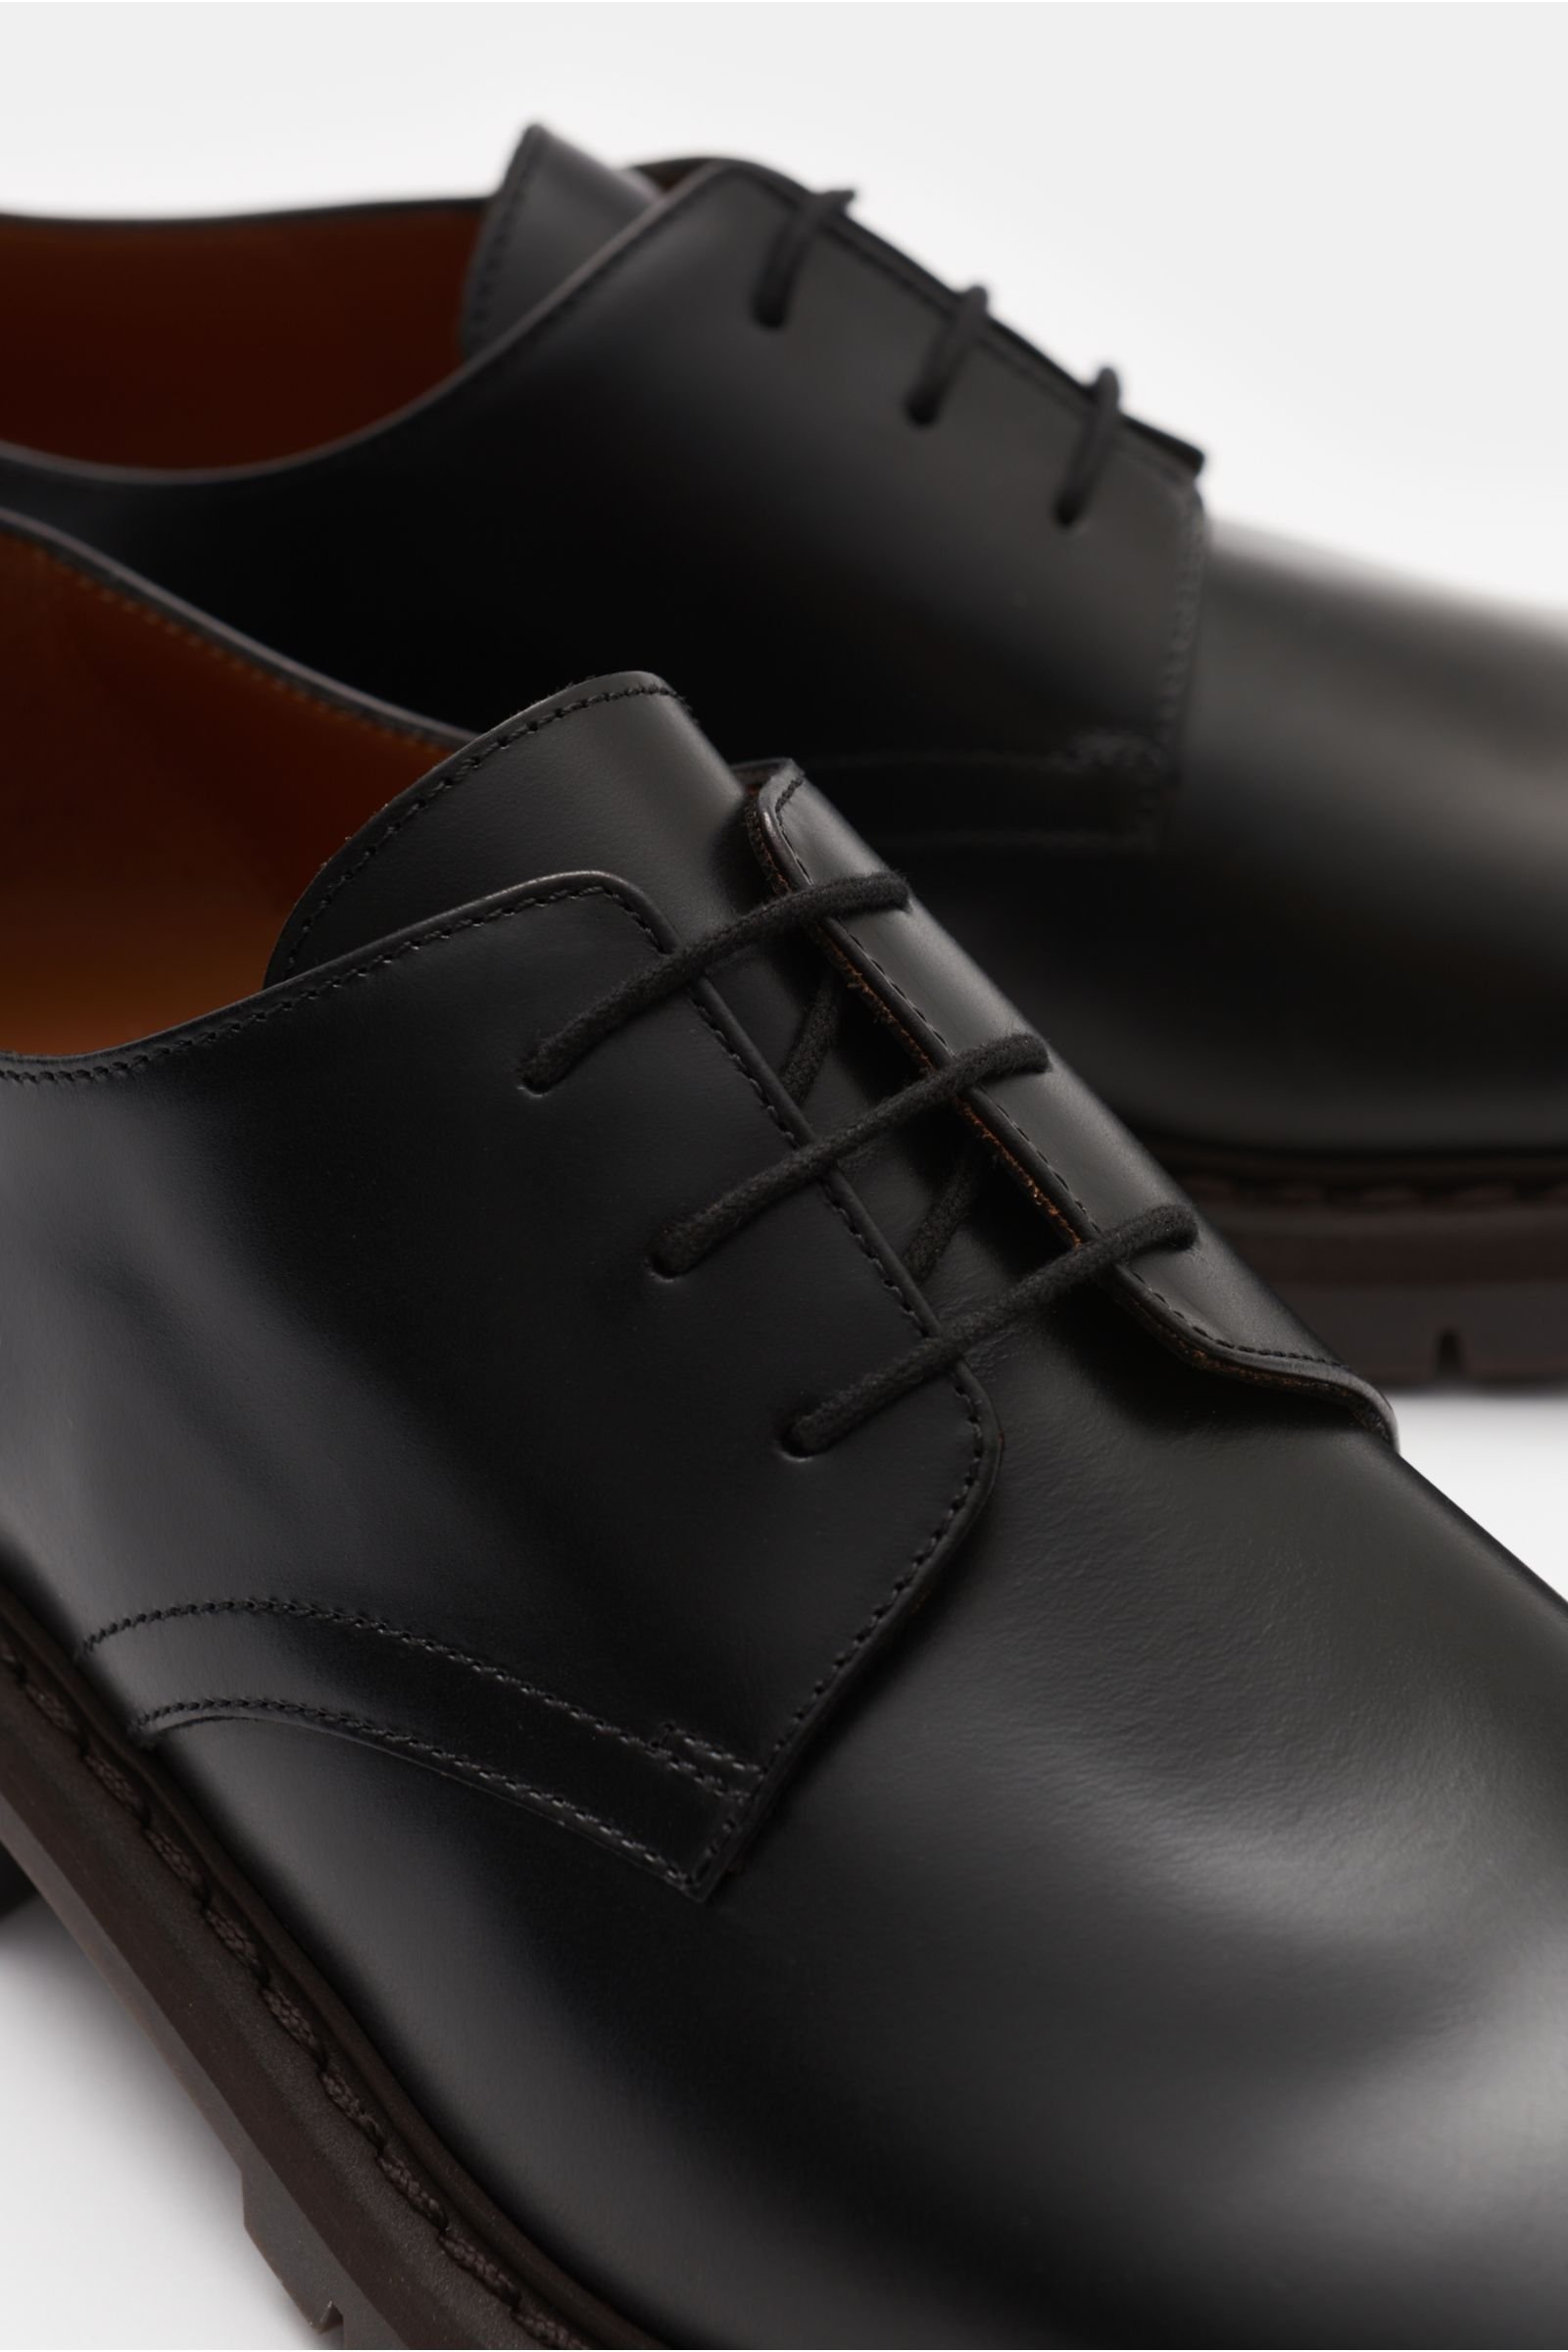 COMMON PROJECTS Derby shoes 'Officer's' black | BRAUN Hamburg